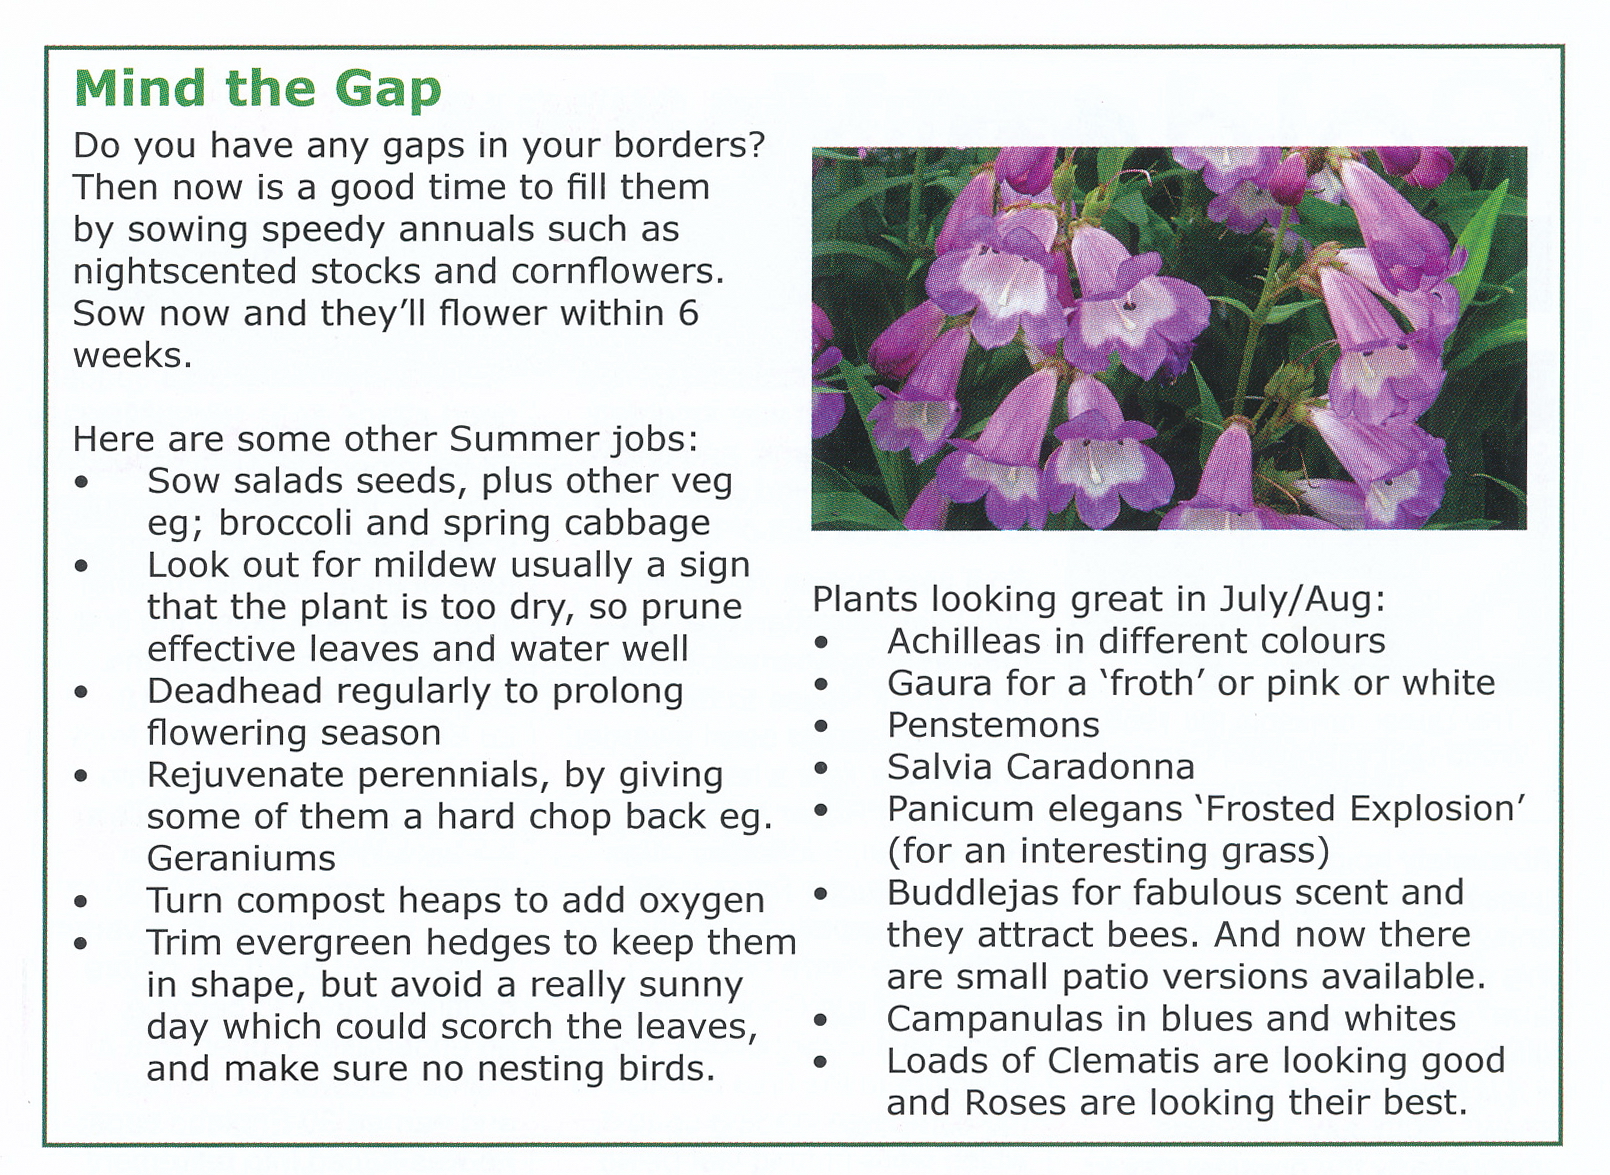 Article about Top garden jobs for July and best plants for July